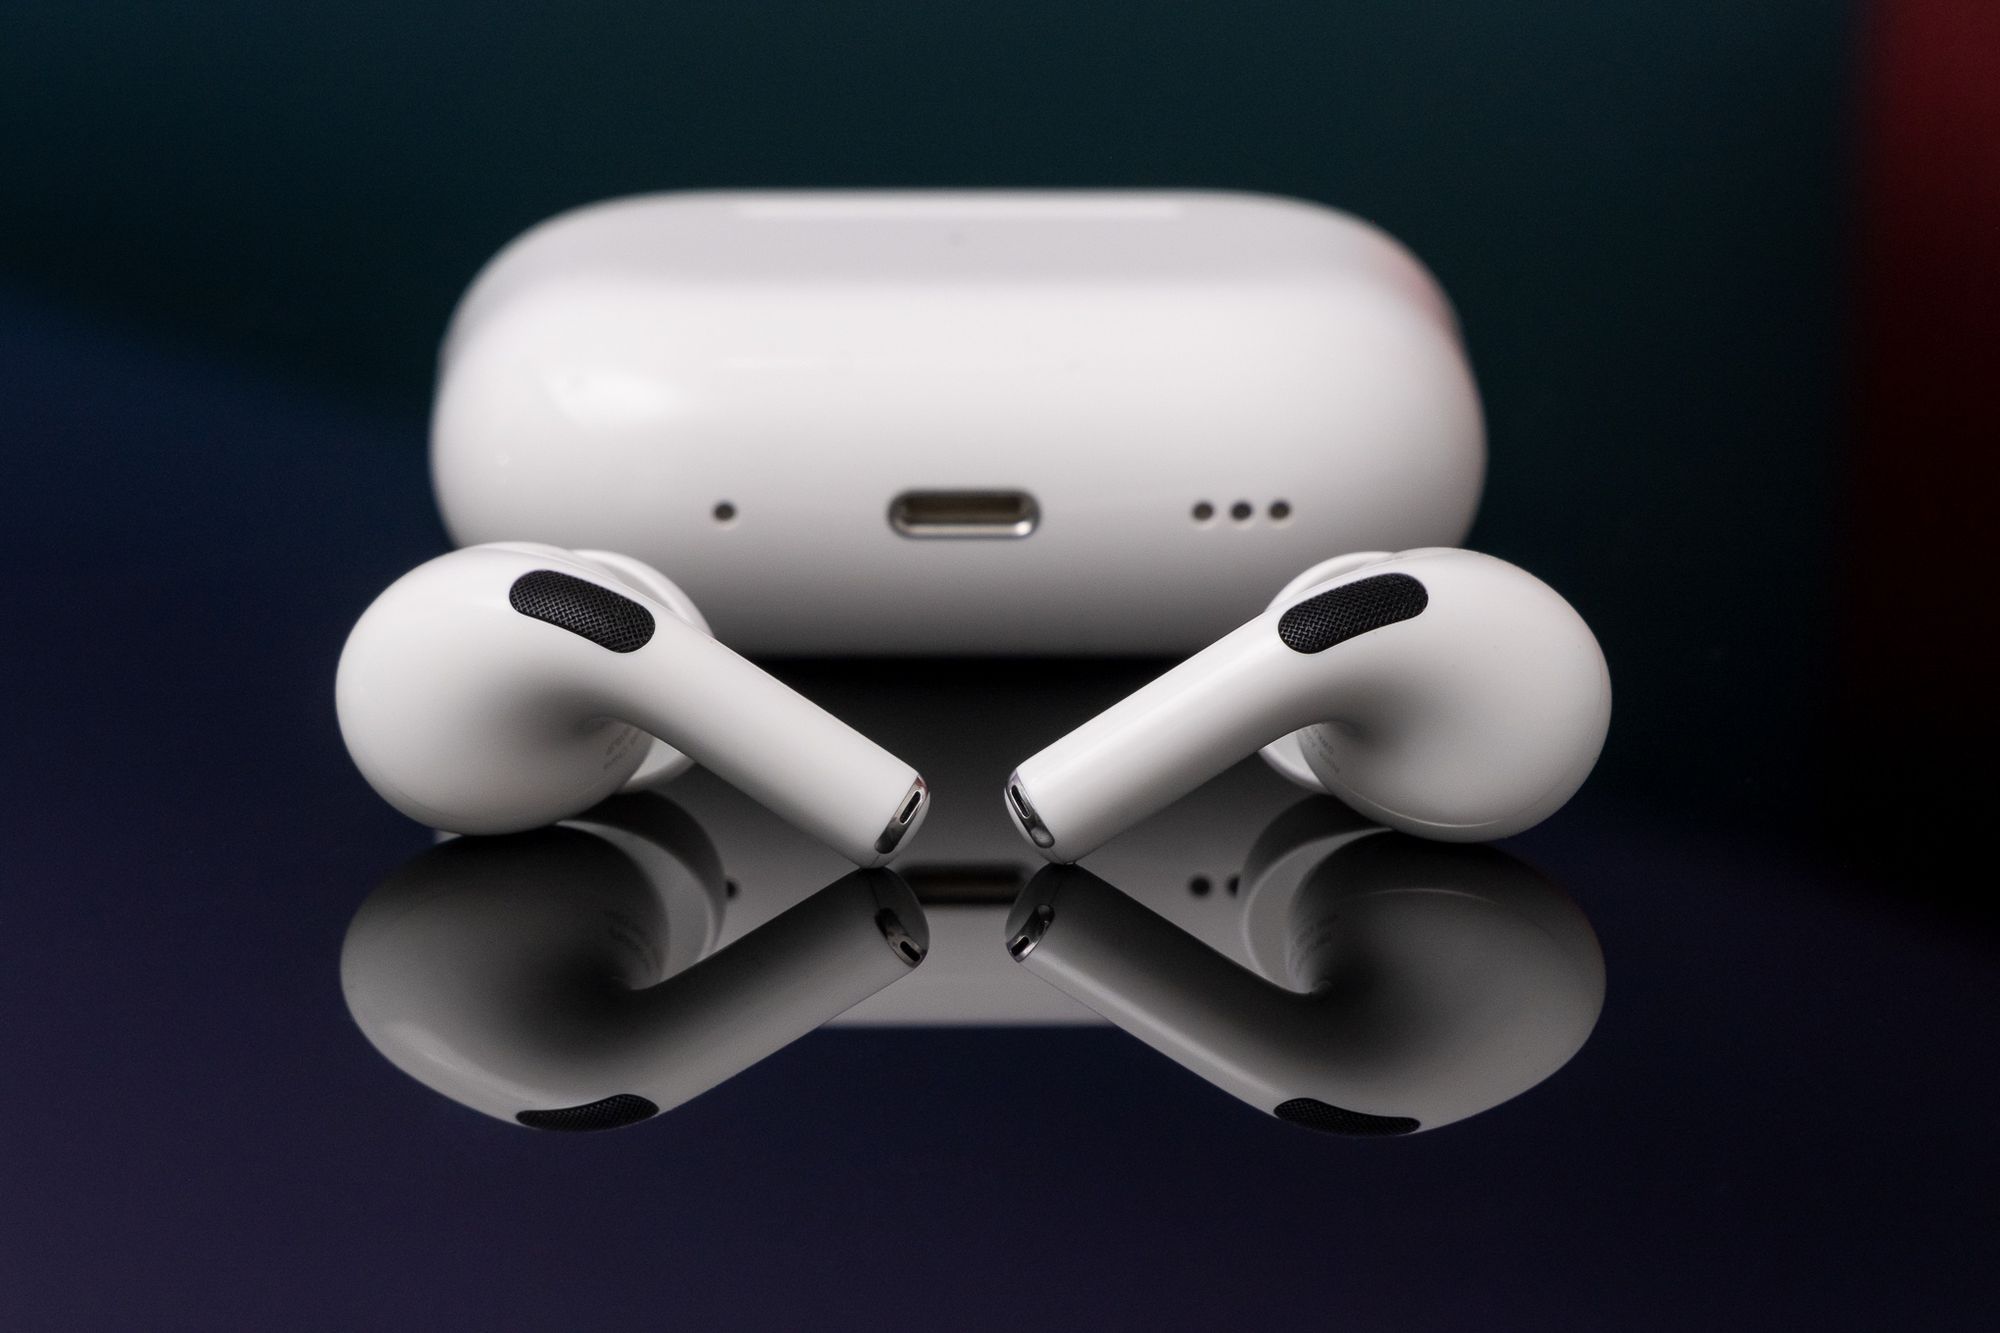 The AirPods Pro 2 are on sale for more than $50 off right now at